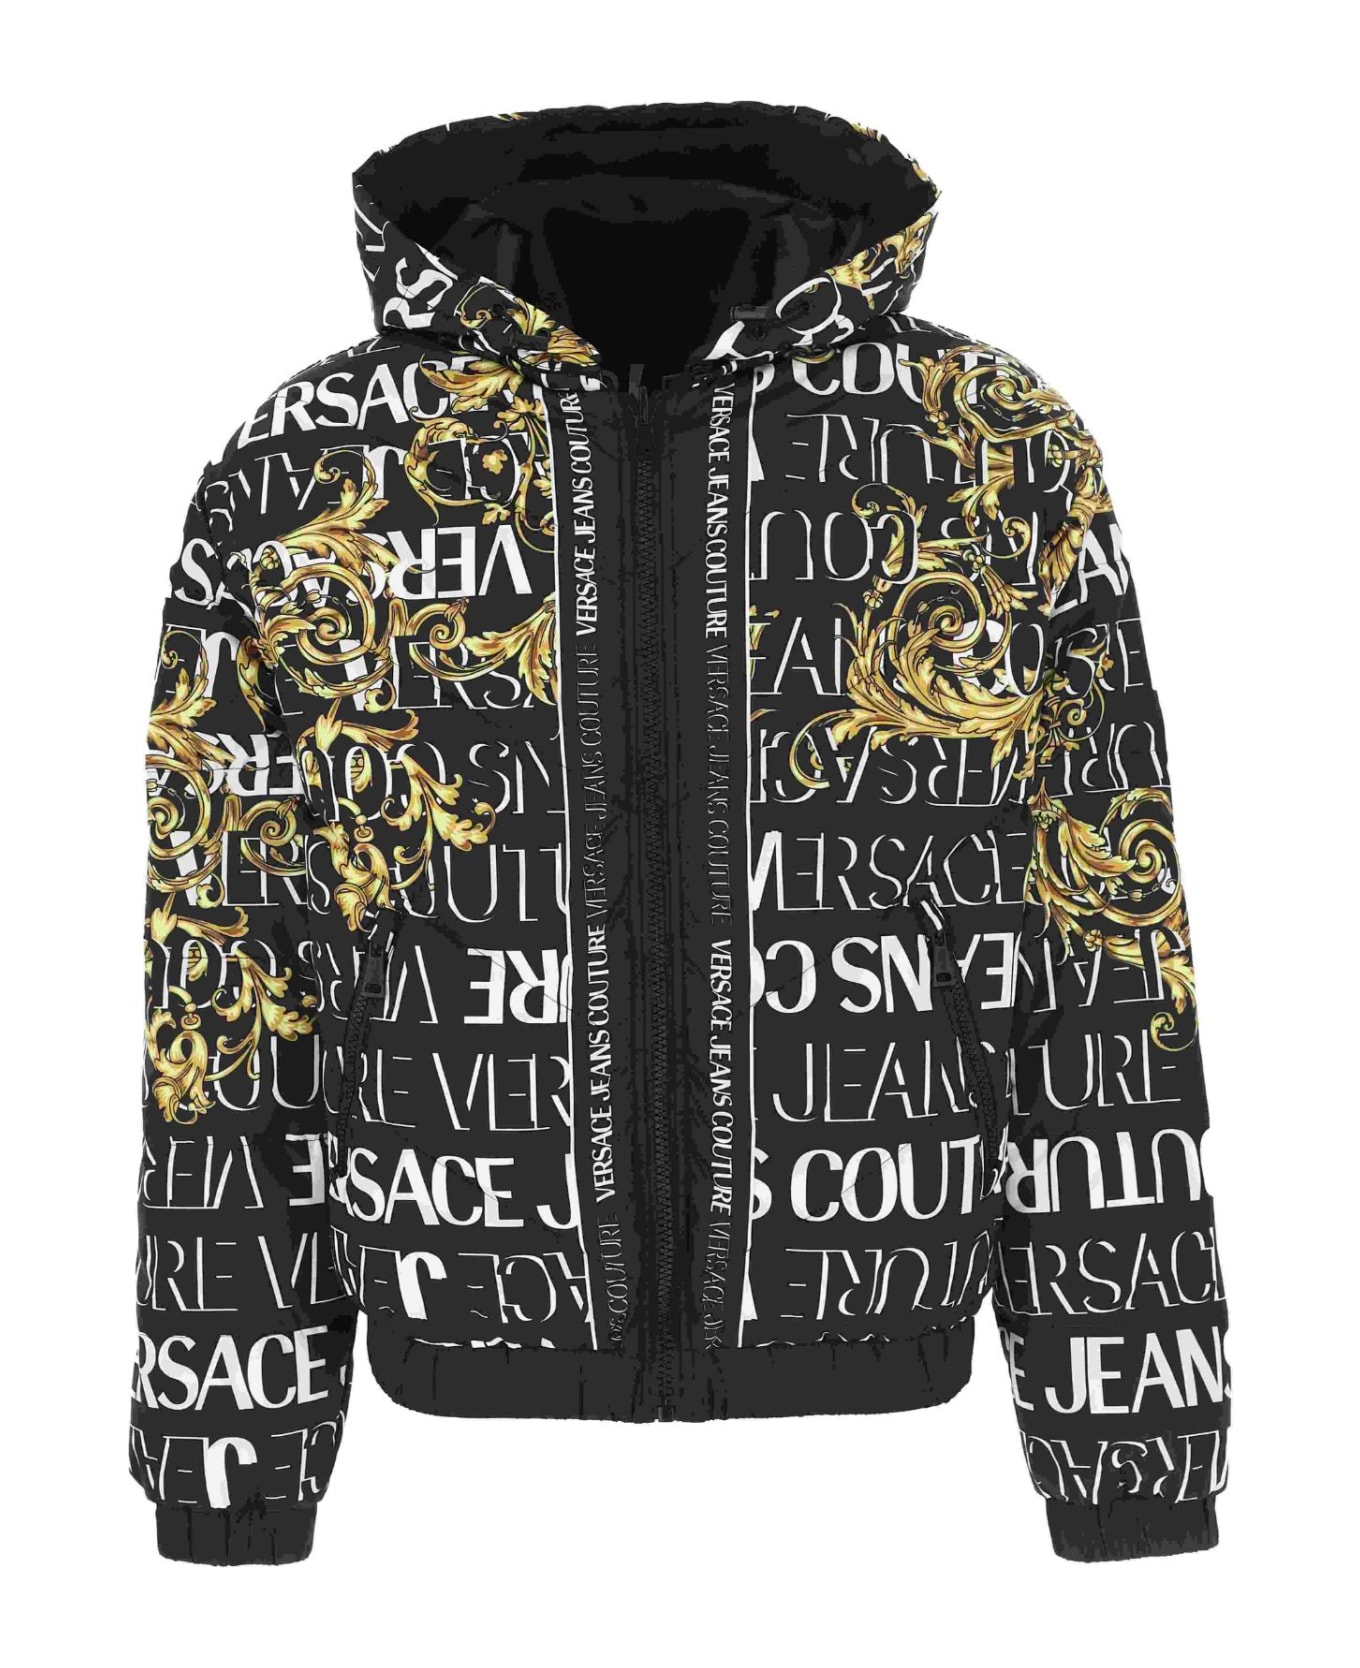 Versace Jeans Couture Reversible Down Jacket With Hood. - Black ダウンジャケット